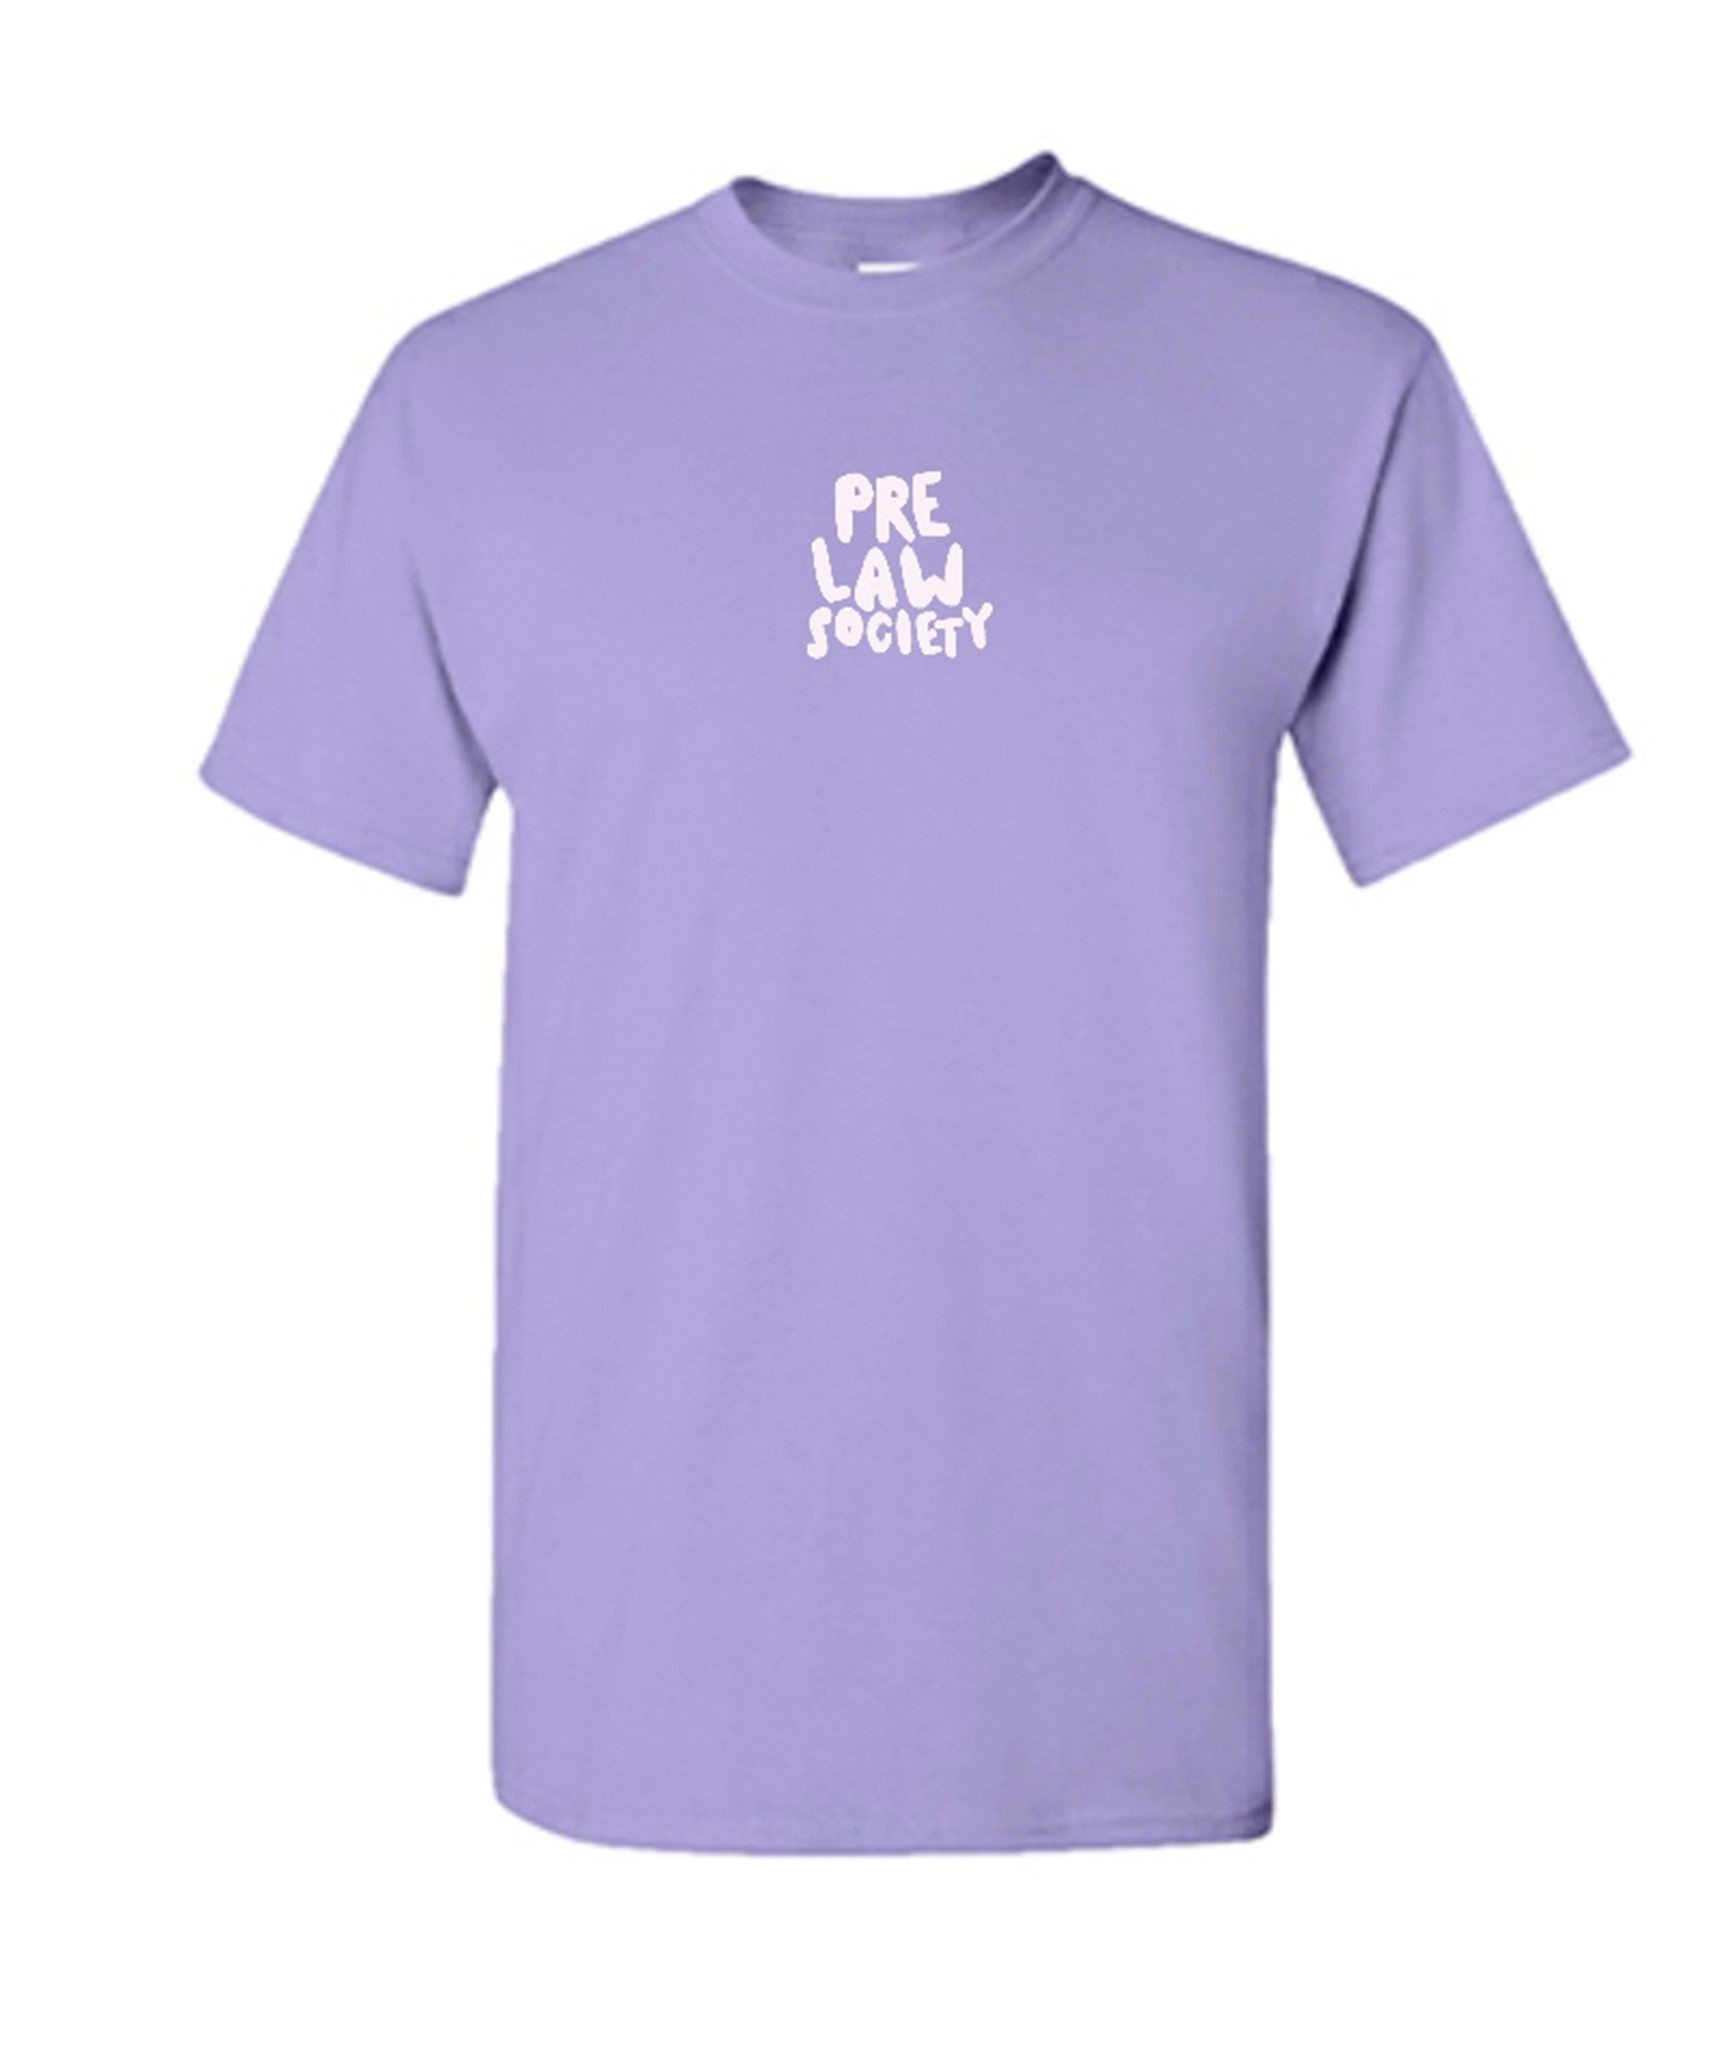 Lavender Shirt with White Lettering